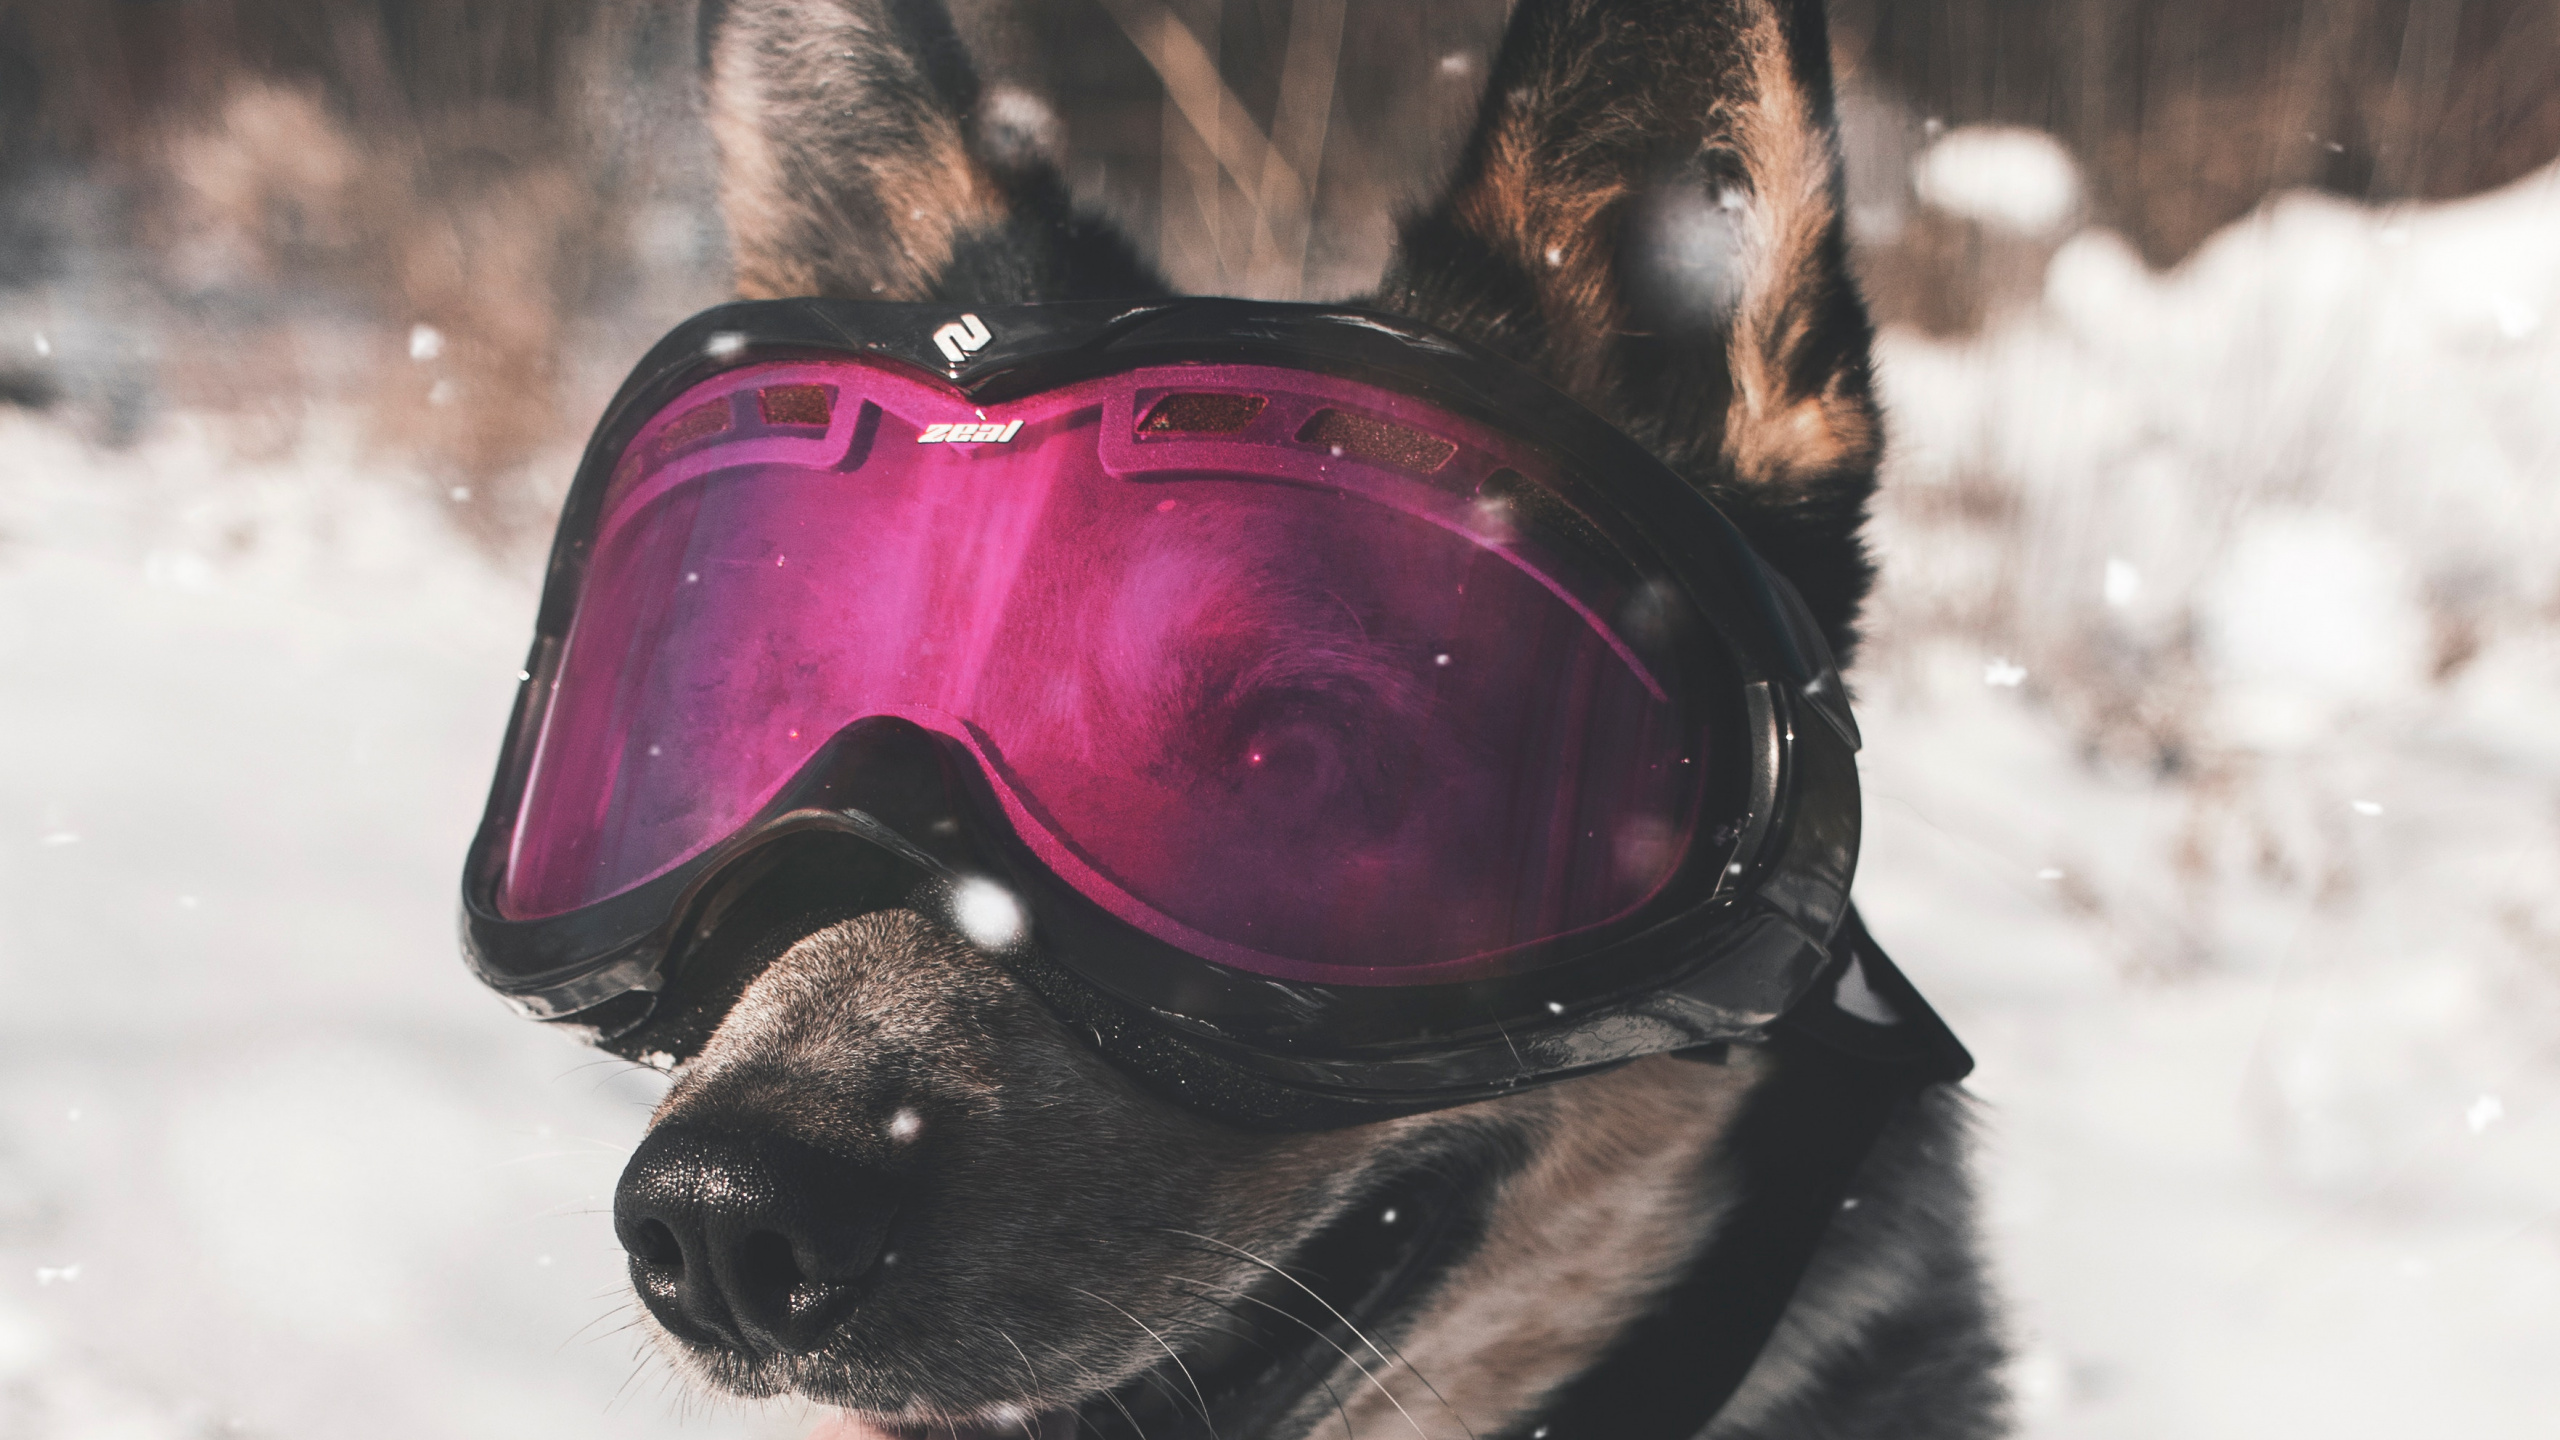 Black and Brown Short Coated Dog Wearing Red Goggles on Snow Covered Ground During Daytime. Wallpaper in 2560x1440 Resolution